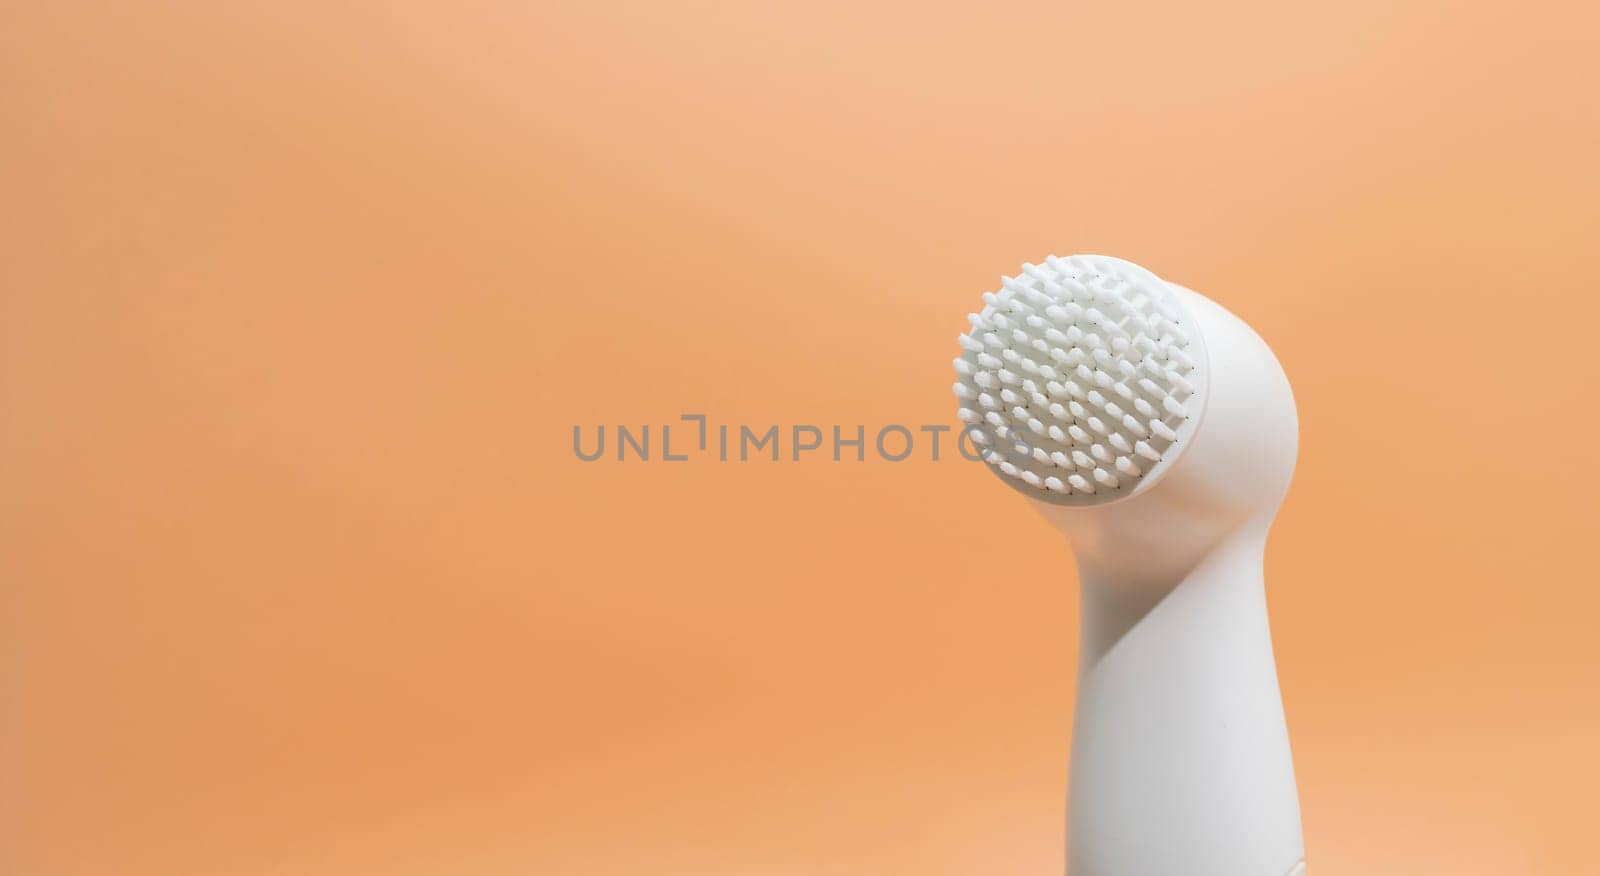 Design Electrical Deep Cleansing Face Brush On Peach Orange Background. Copy Space For Text. Deep Cleansing Facial Remove Makeup. Skin Care Technology. Horizontal Banner High quality photo